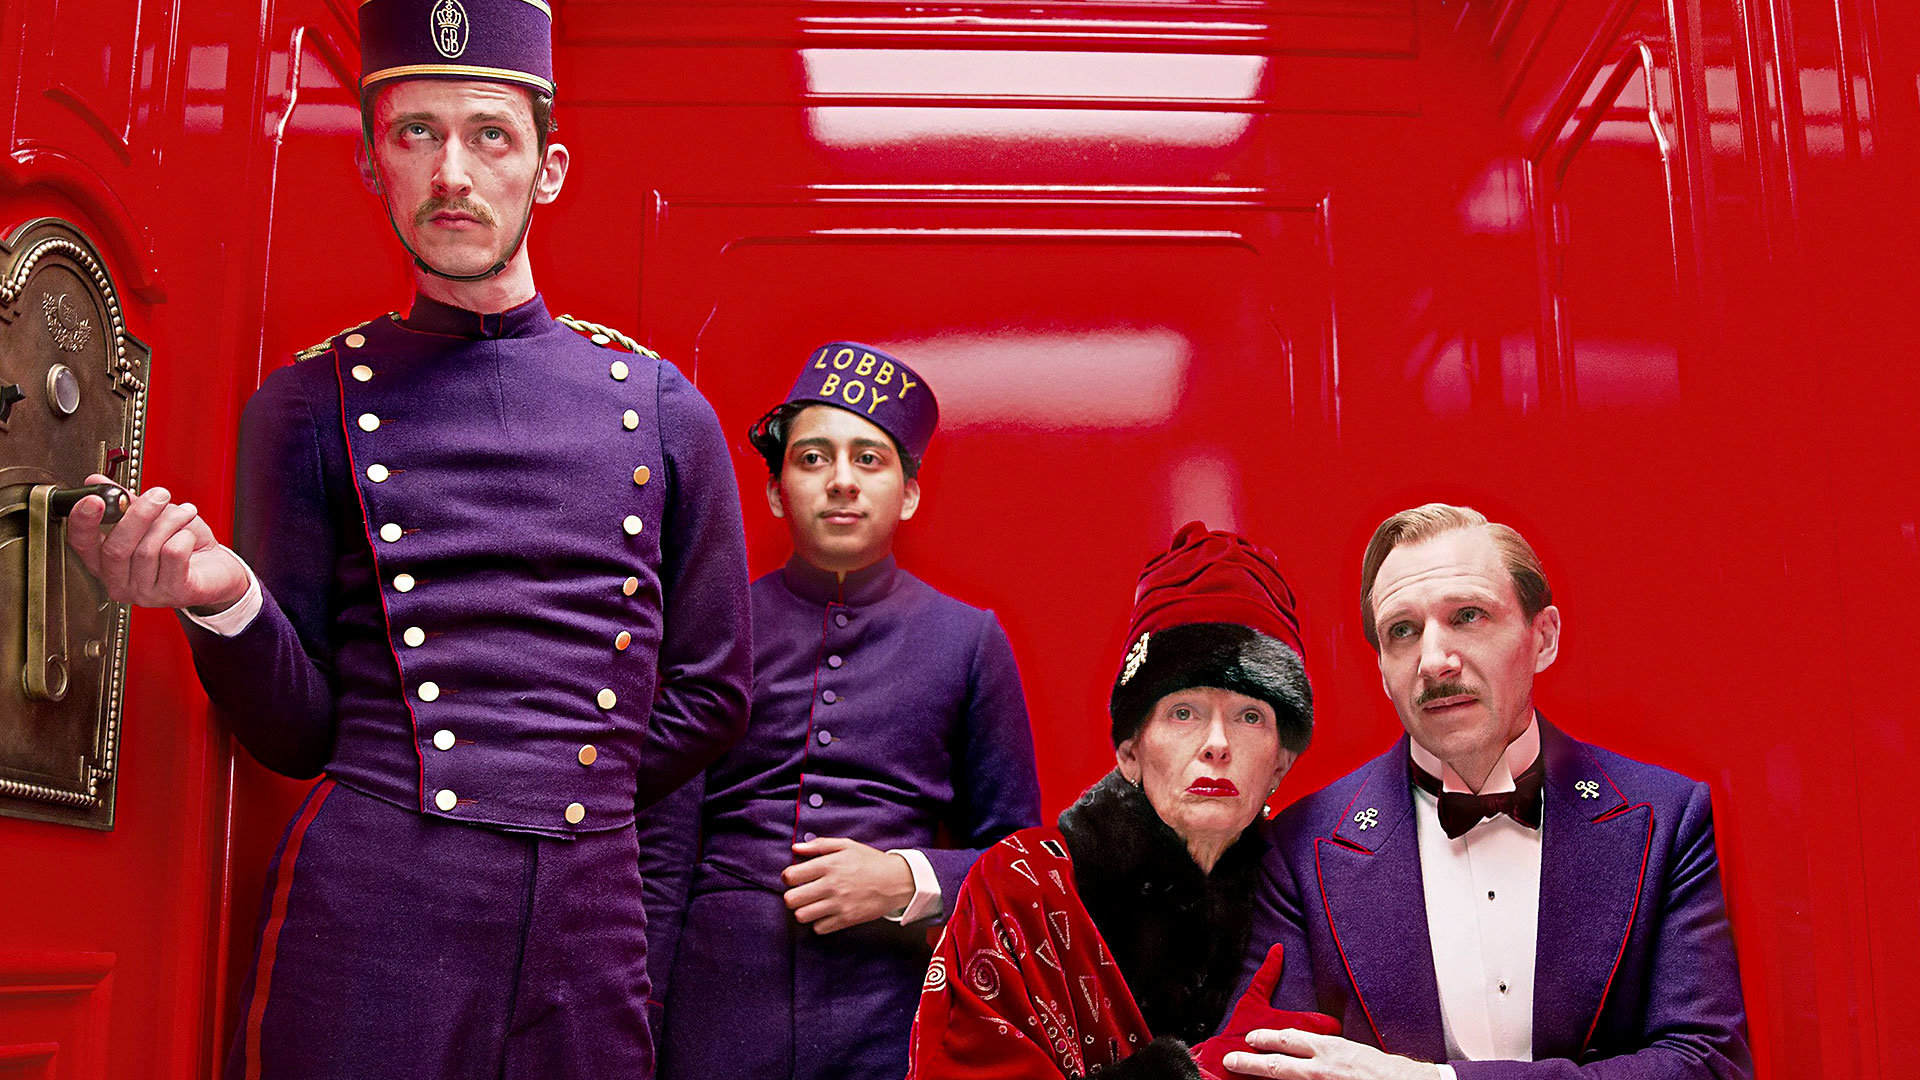 Awesome The Grand Budapest Hotel free wallpaper ID:73456 for 1080p computer